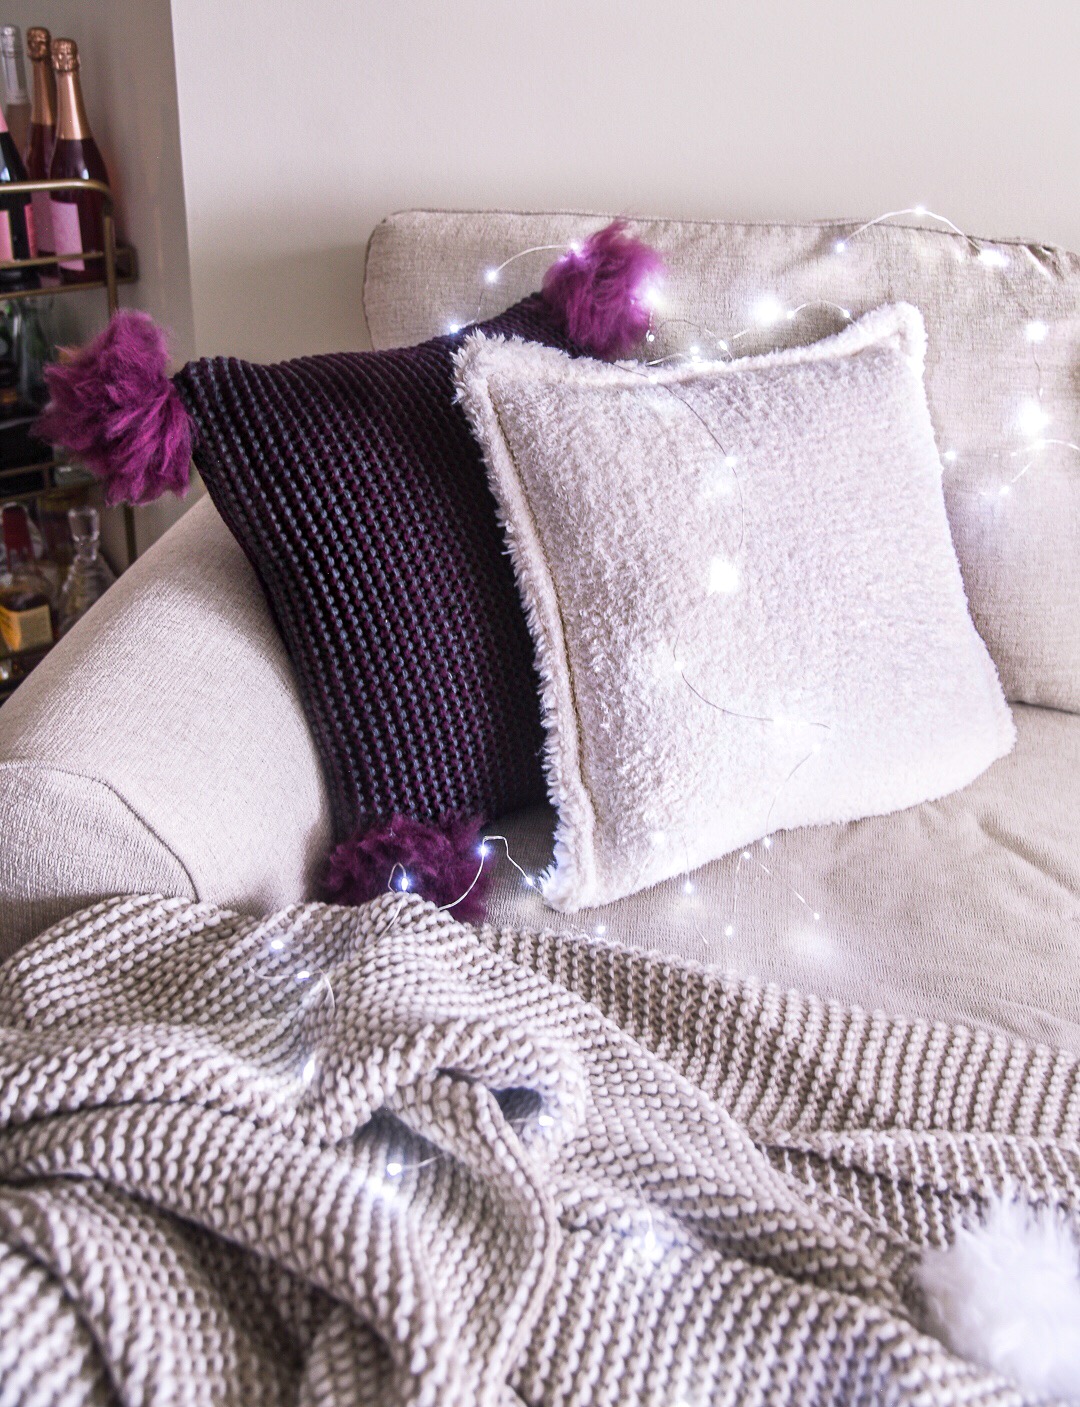 Burgundy pom pom pillow from UGG at Nordstrom - how to decorate a cozy home by Chicago style blogger Visions of Vogue